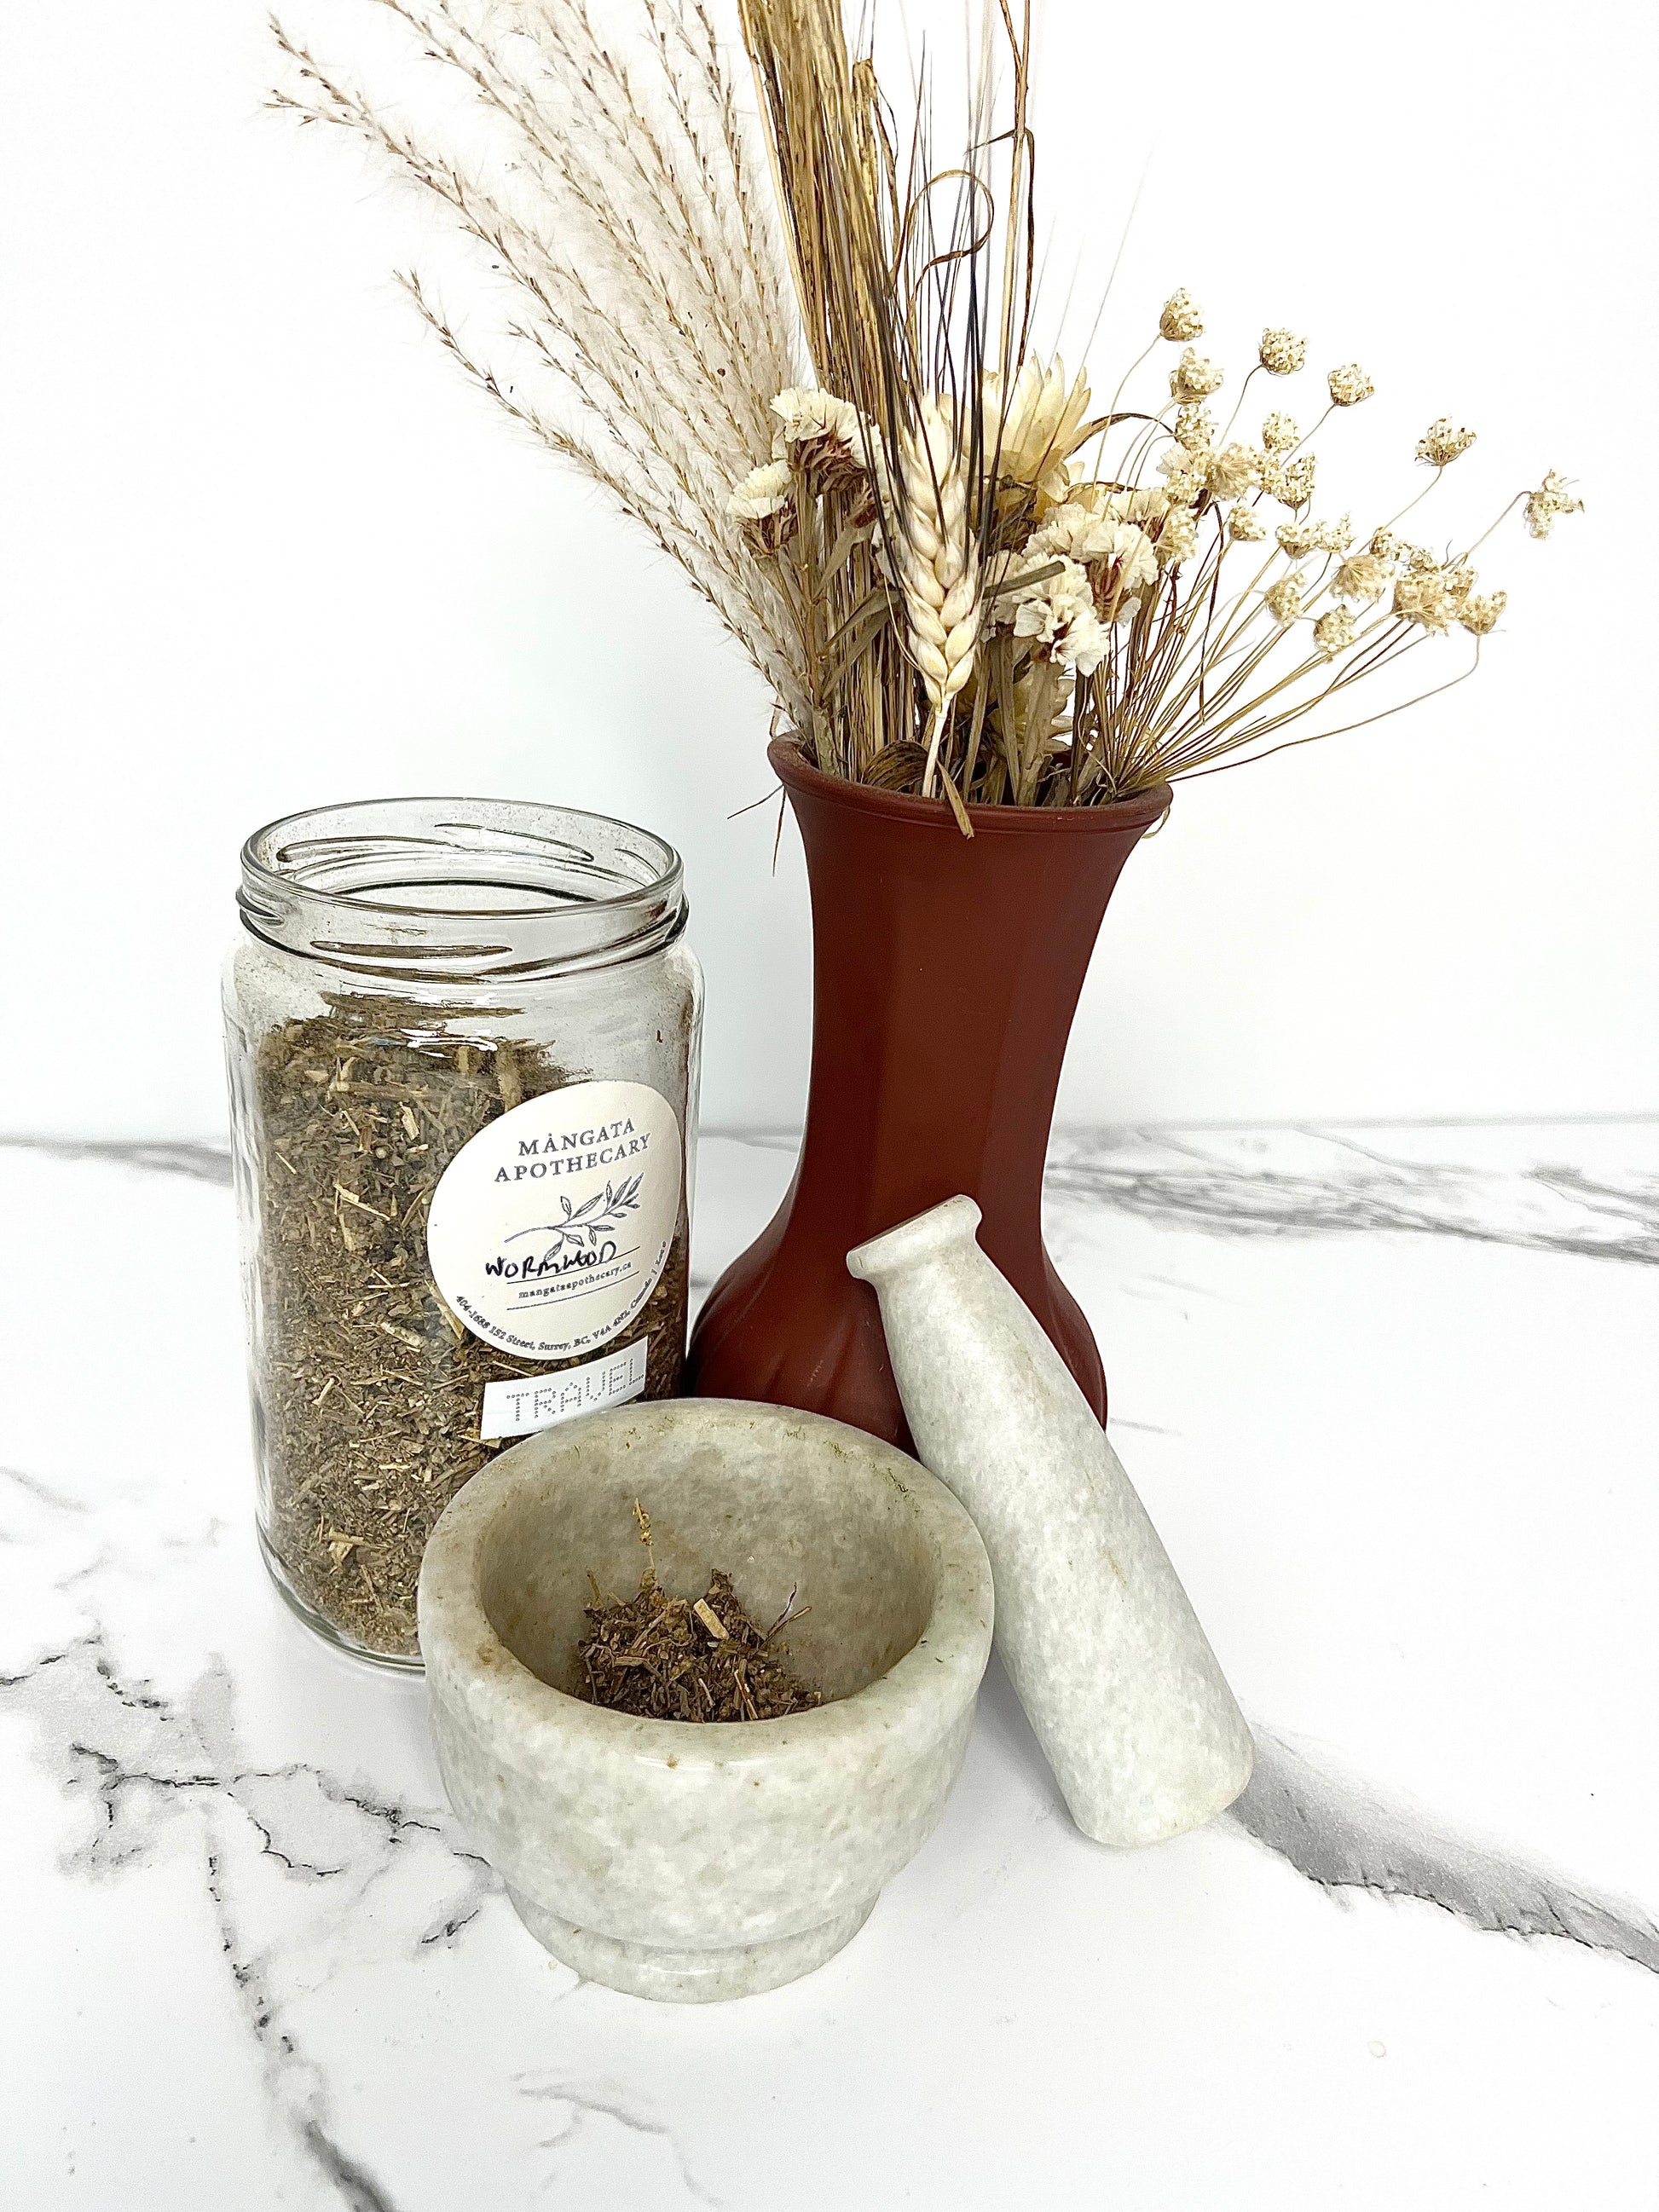 Wormwood Herb - Product Image For Mangata Dispensary